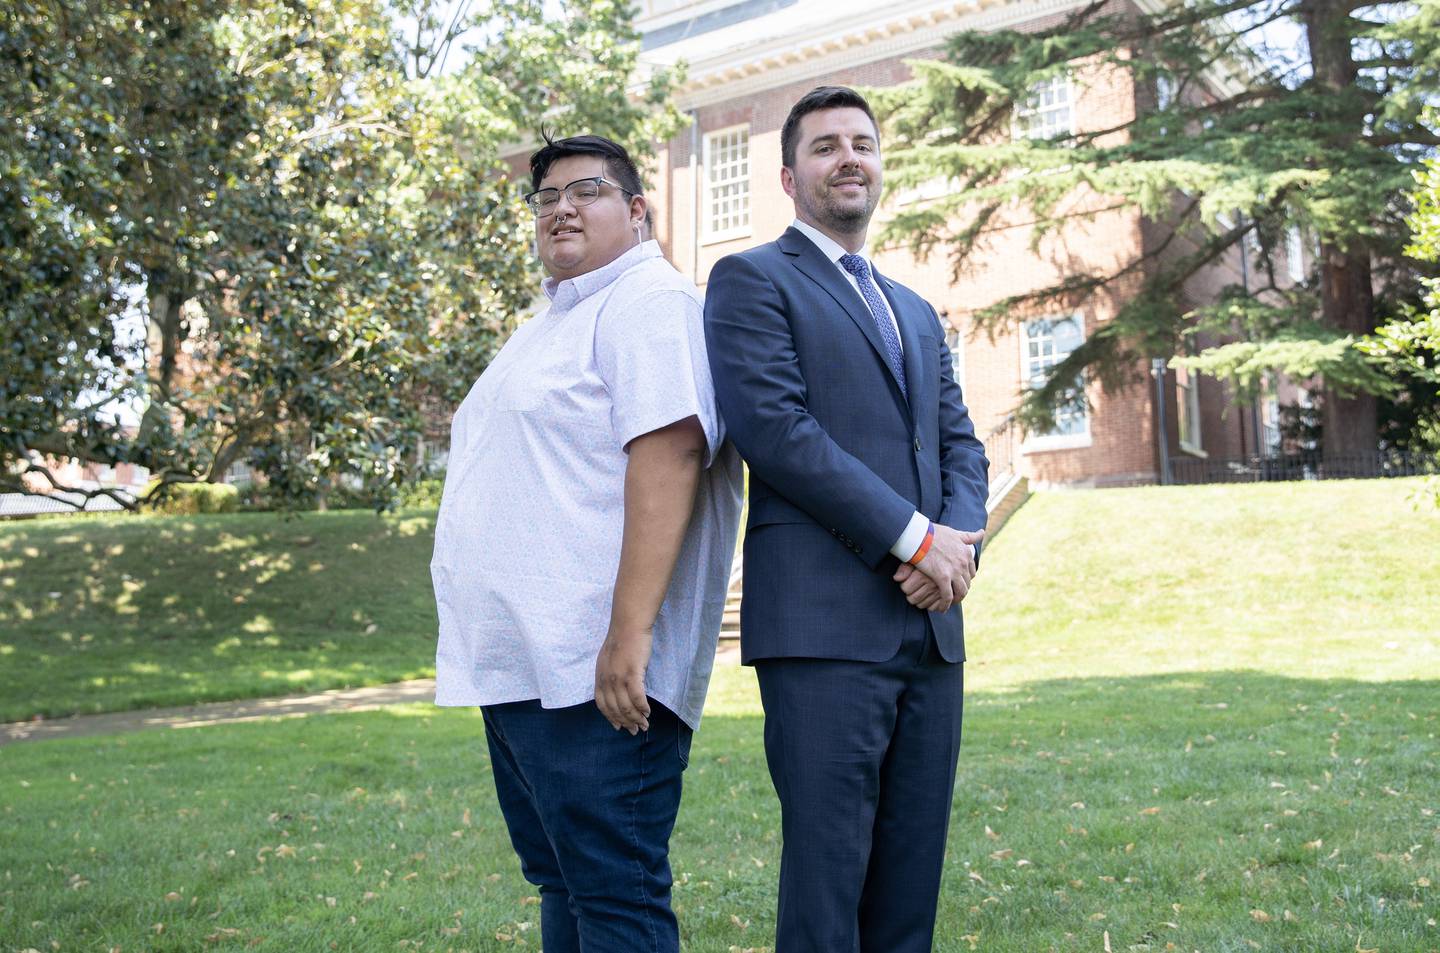 Q&A with the leaders of the newly-launched state Commission on LGBTQ affairs, Jeremy Browning who was just hired as executive director of the commission and Joe Toolan as the chairperson of the commission.